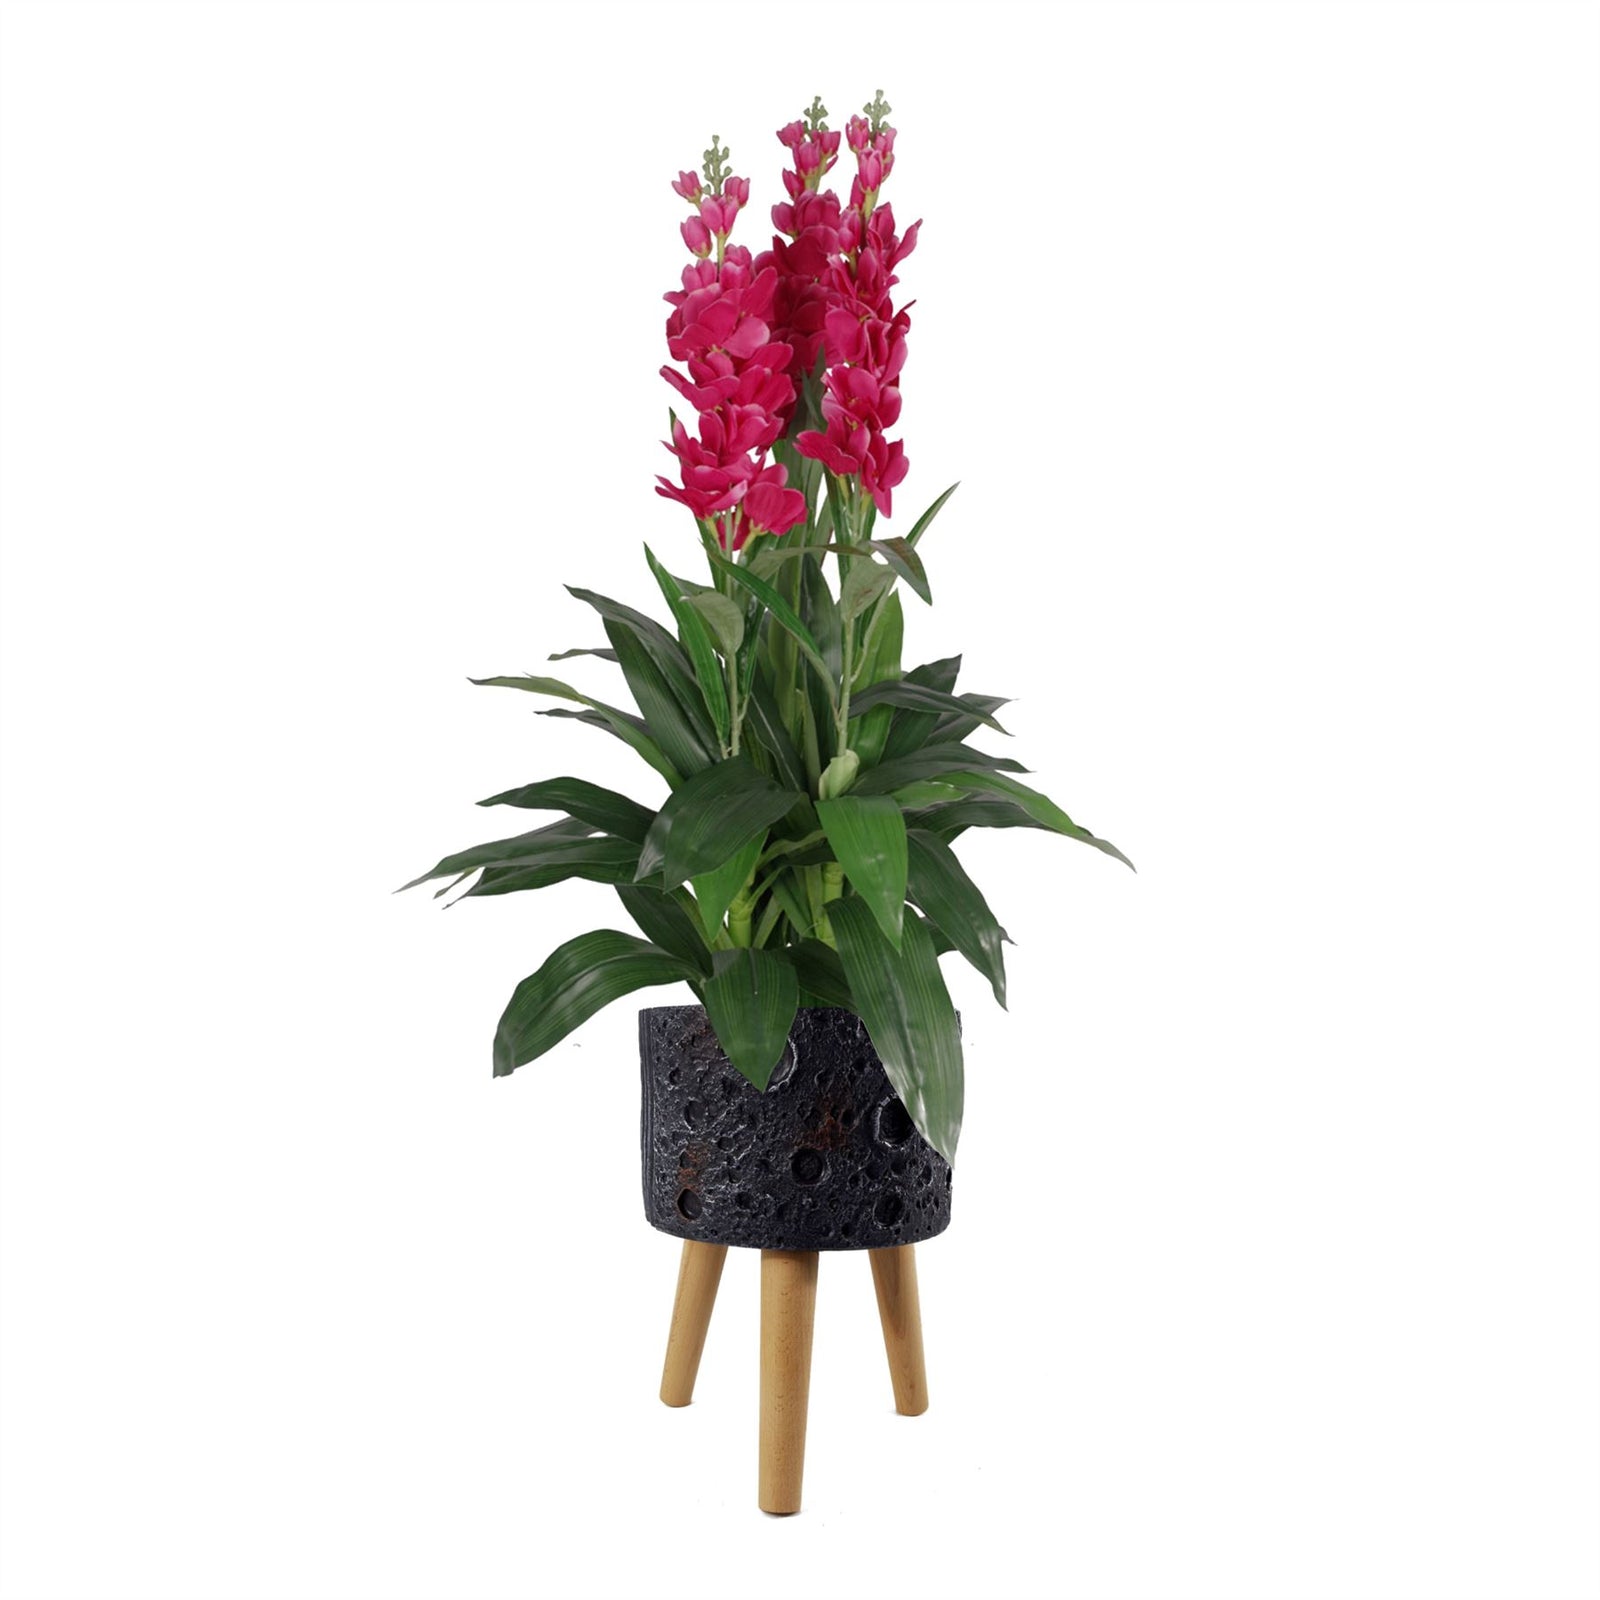 Leaf Moon Black Planter With Stand